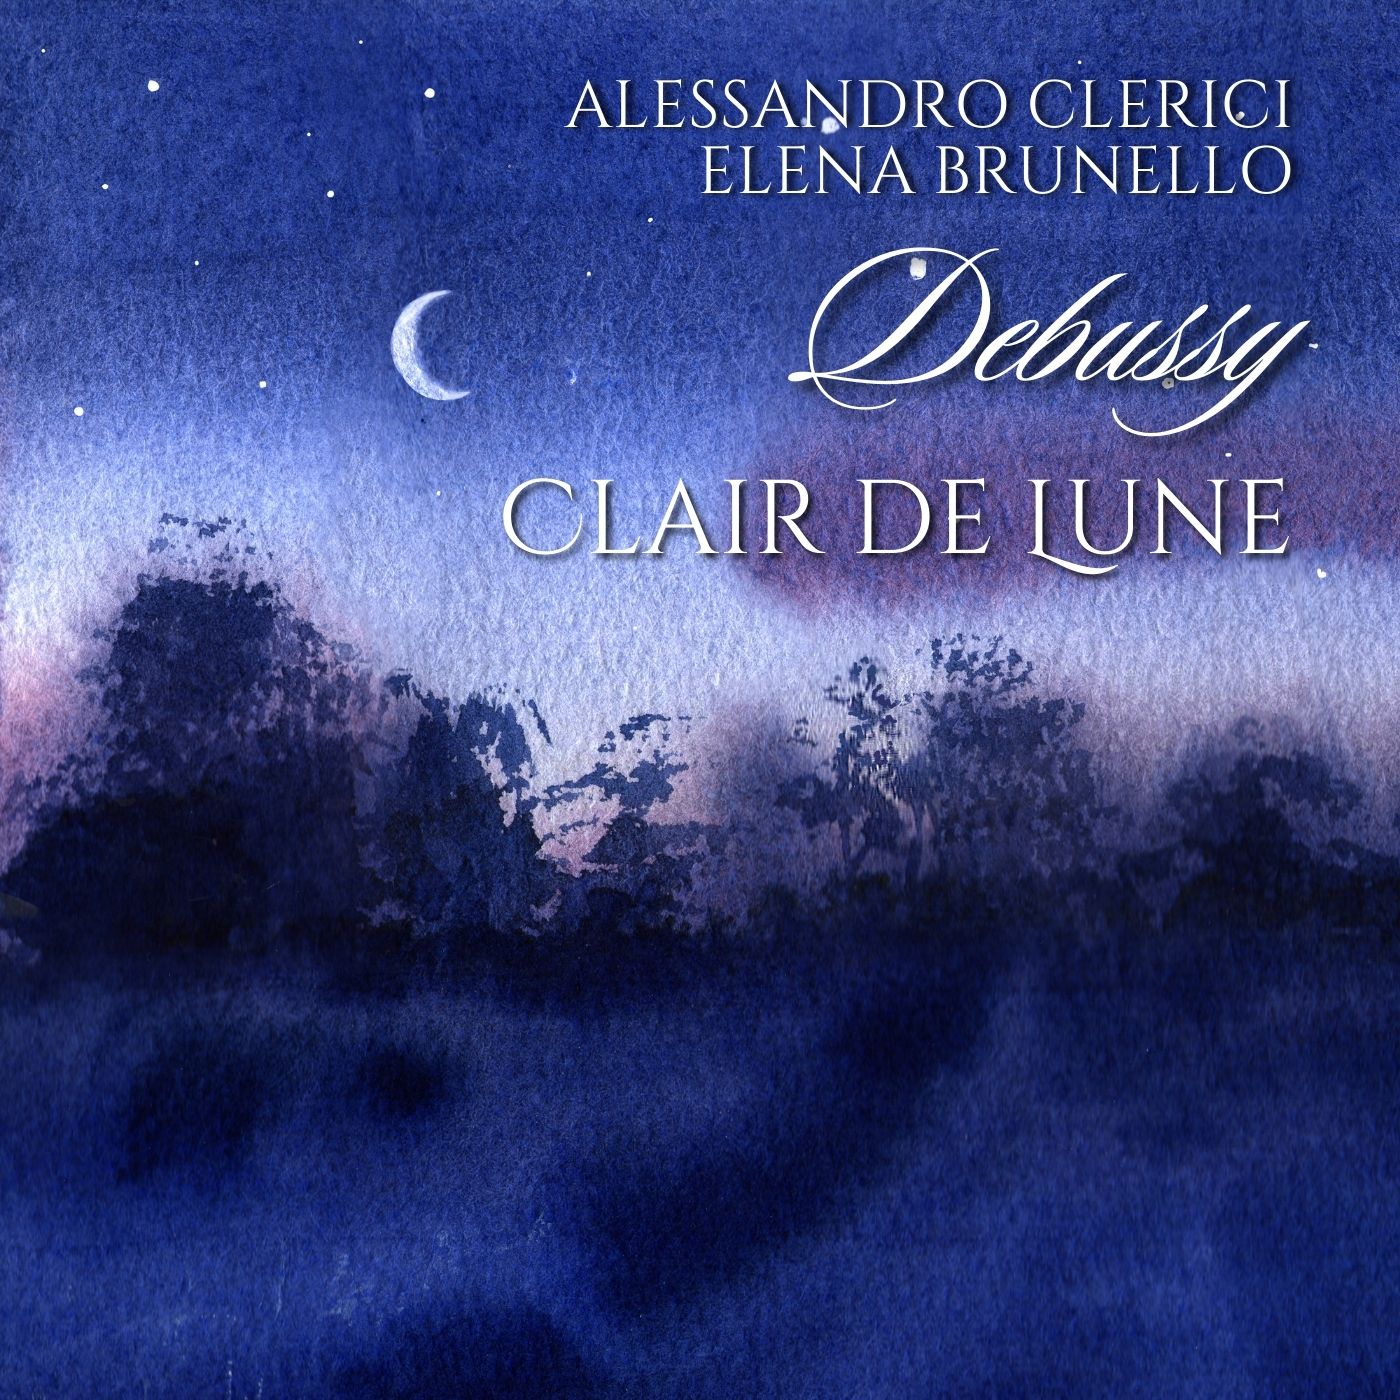 Suite Bergamasque, L. 75: III. Clair de Lune (Transcr. for Violin and Piano by A. Roelens)